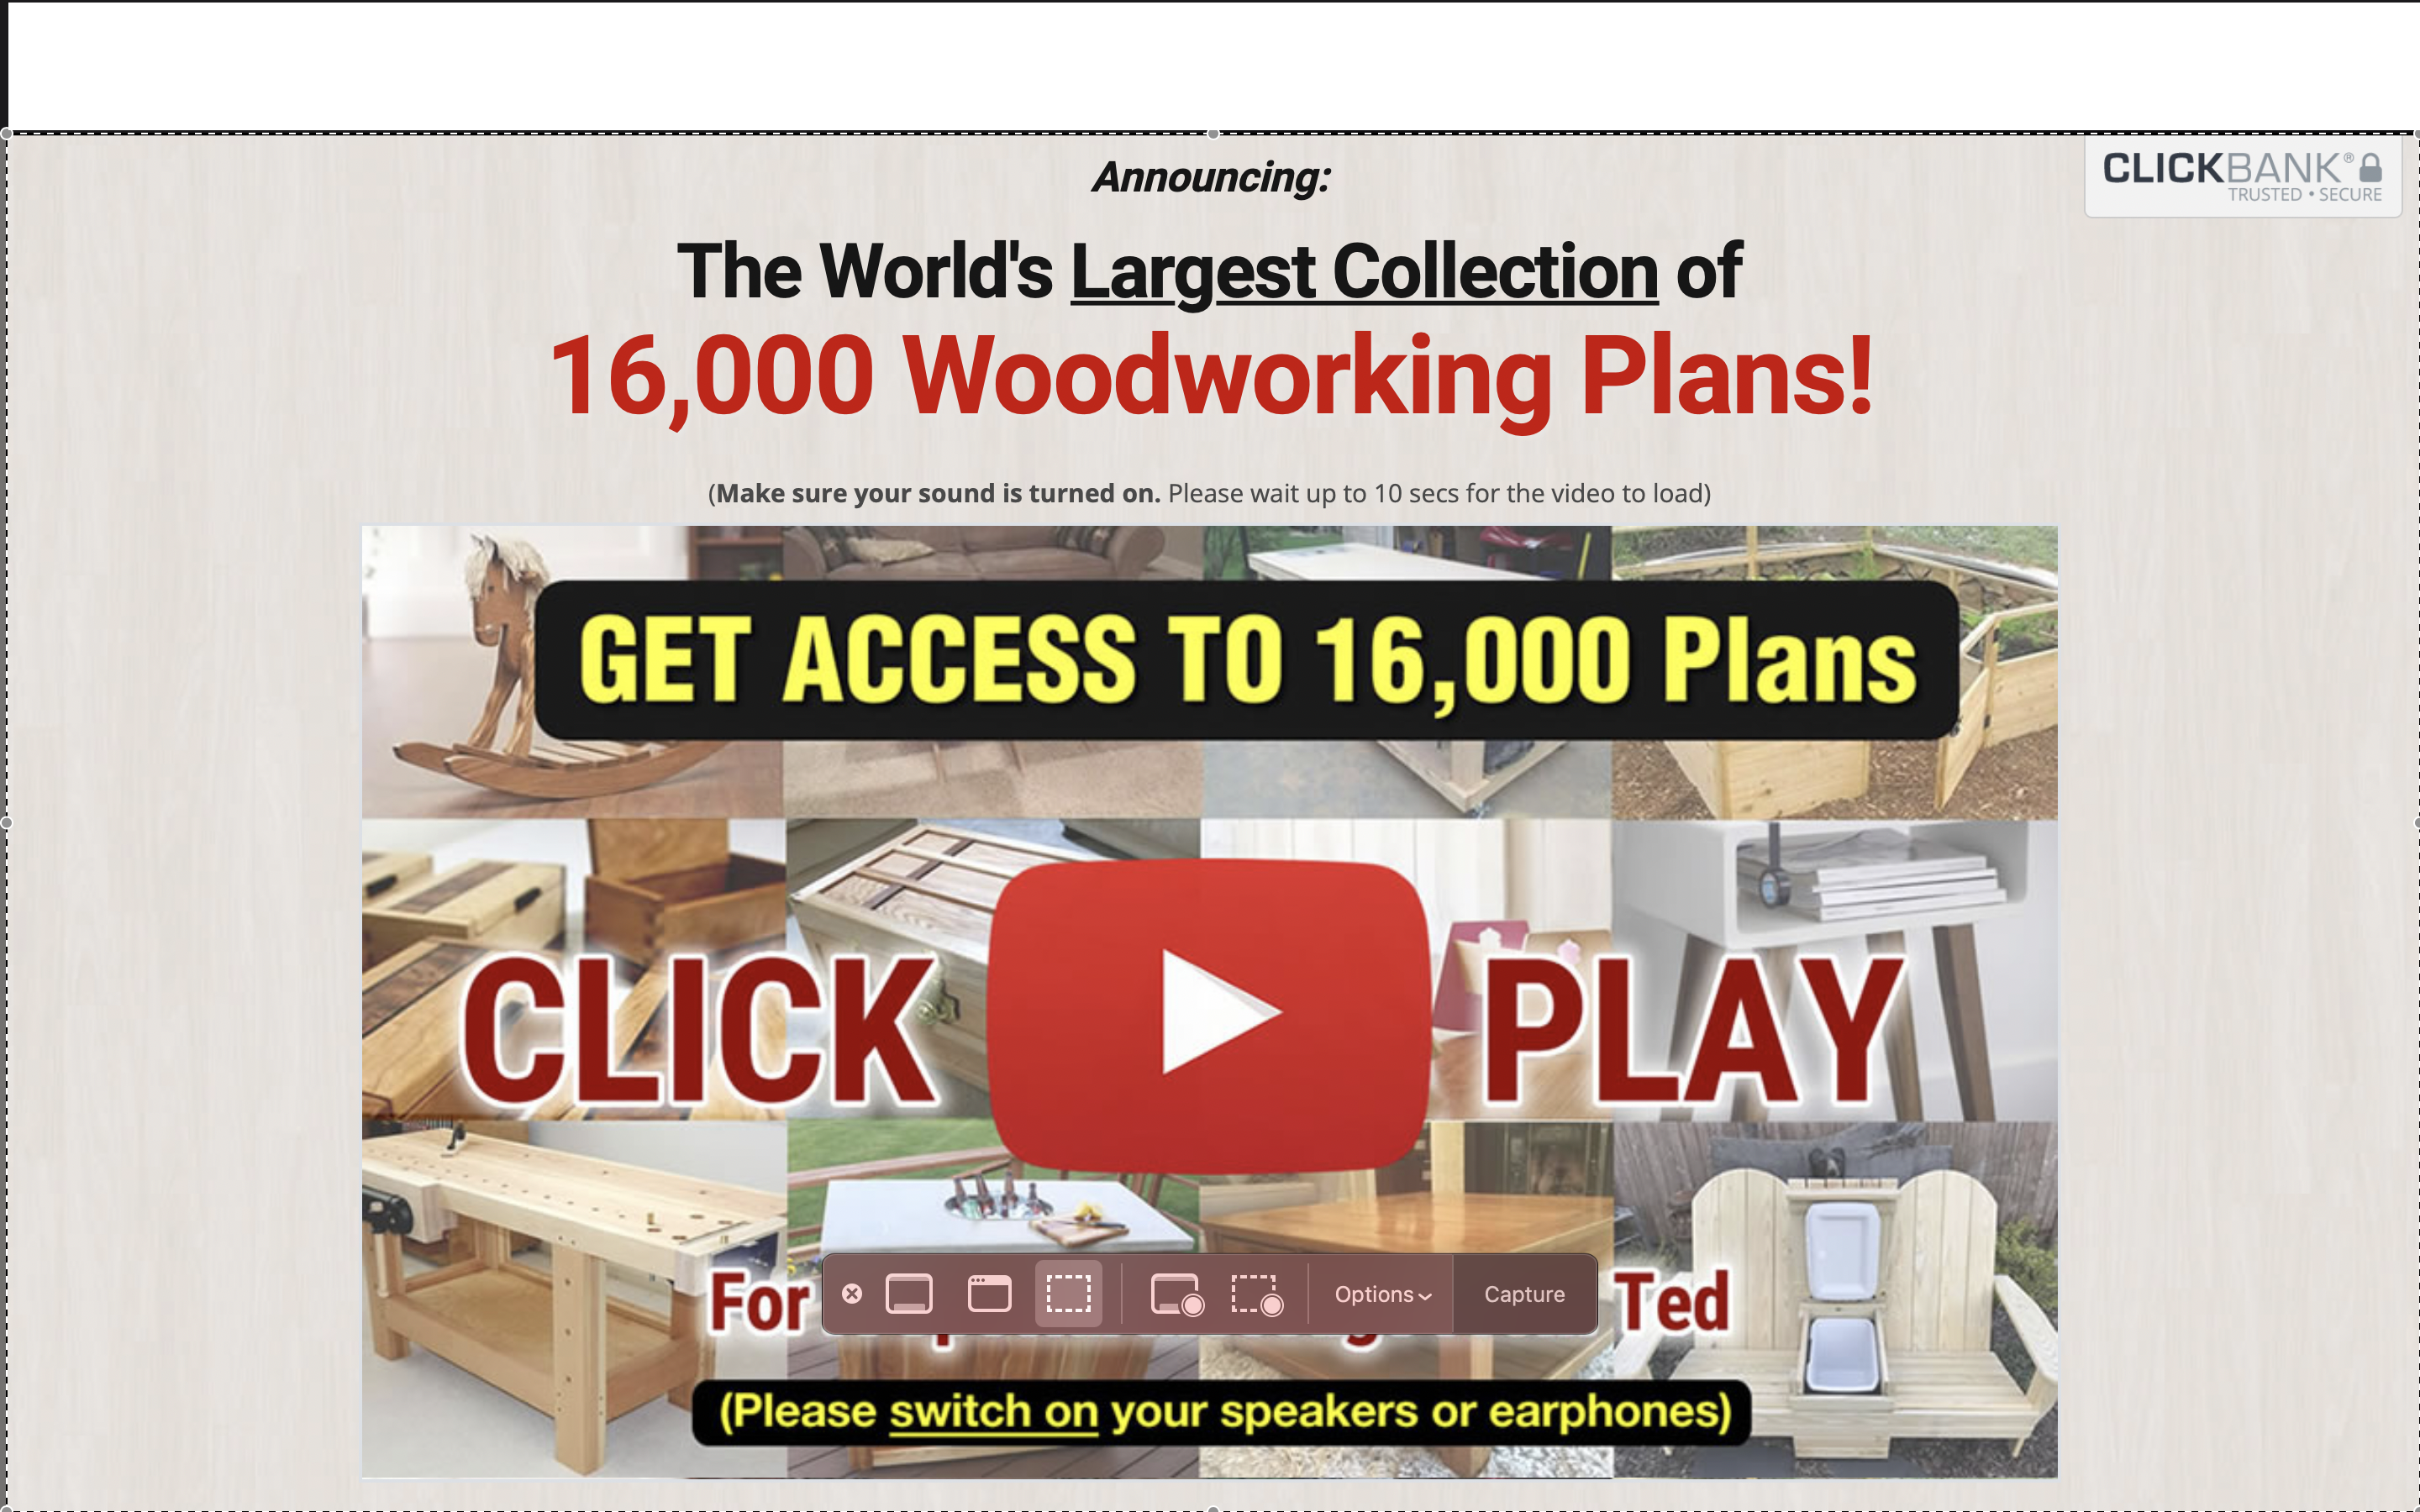 teds woodwork announcement on clickbank